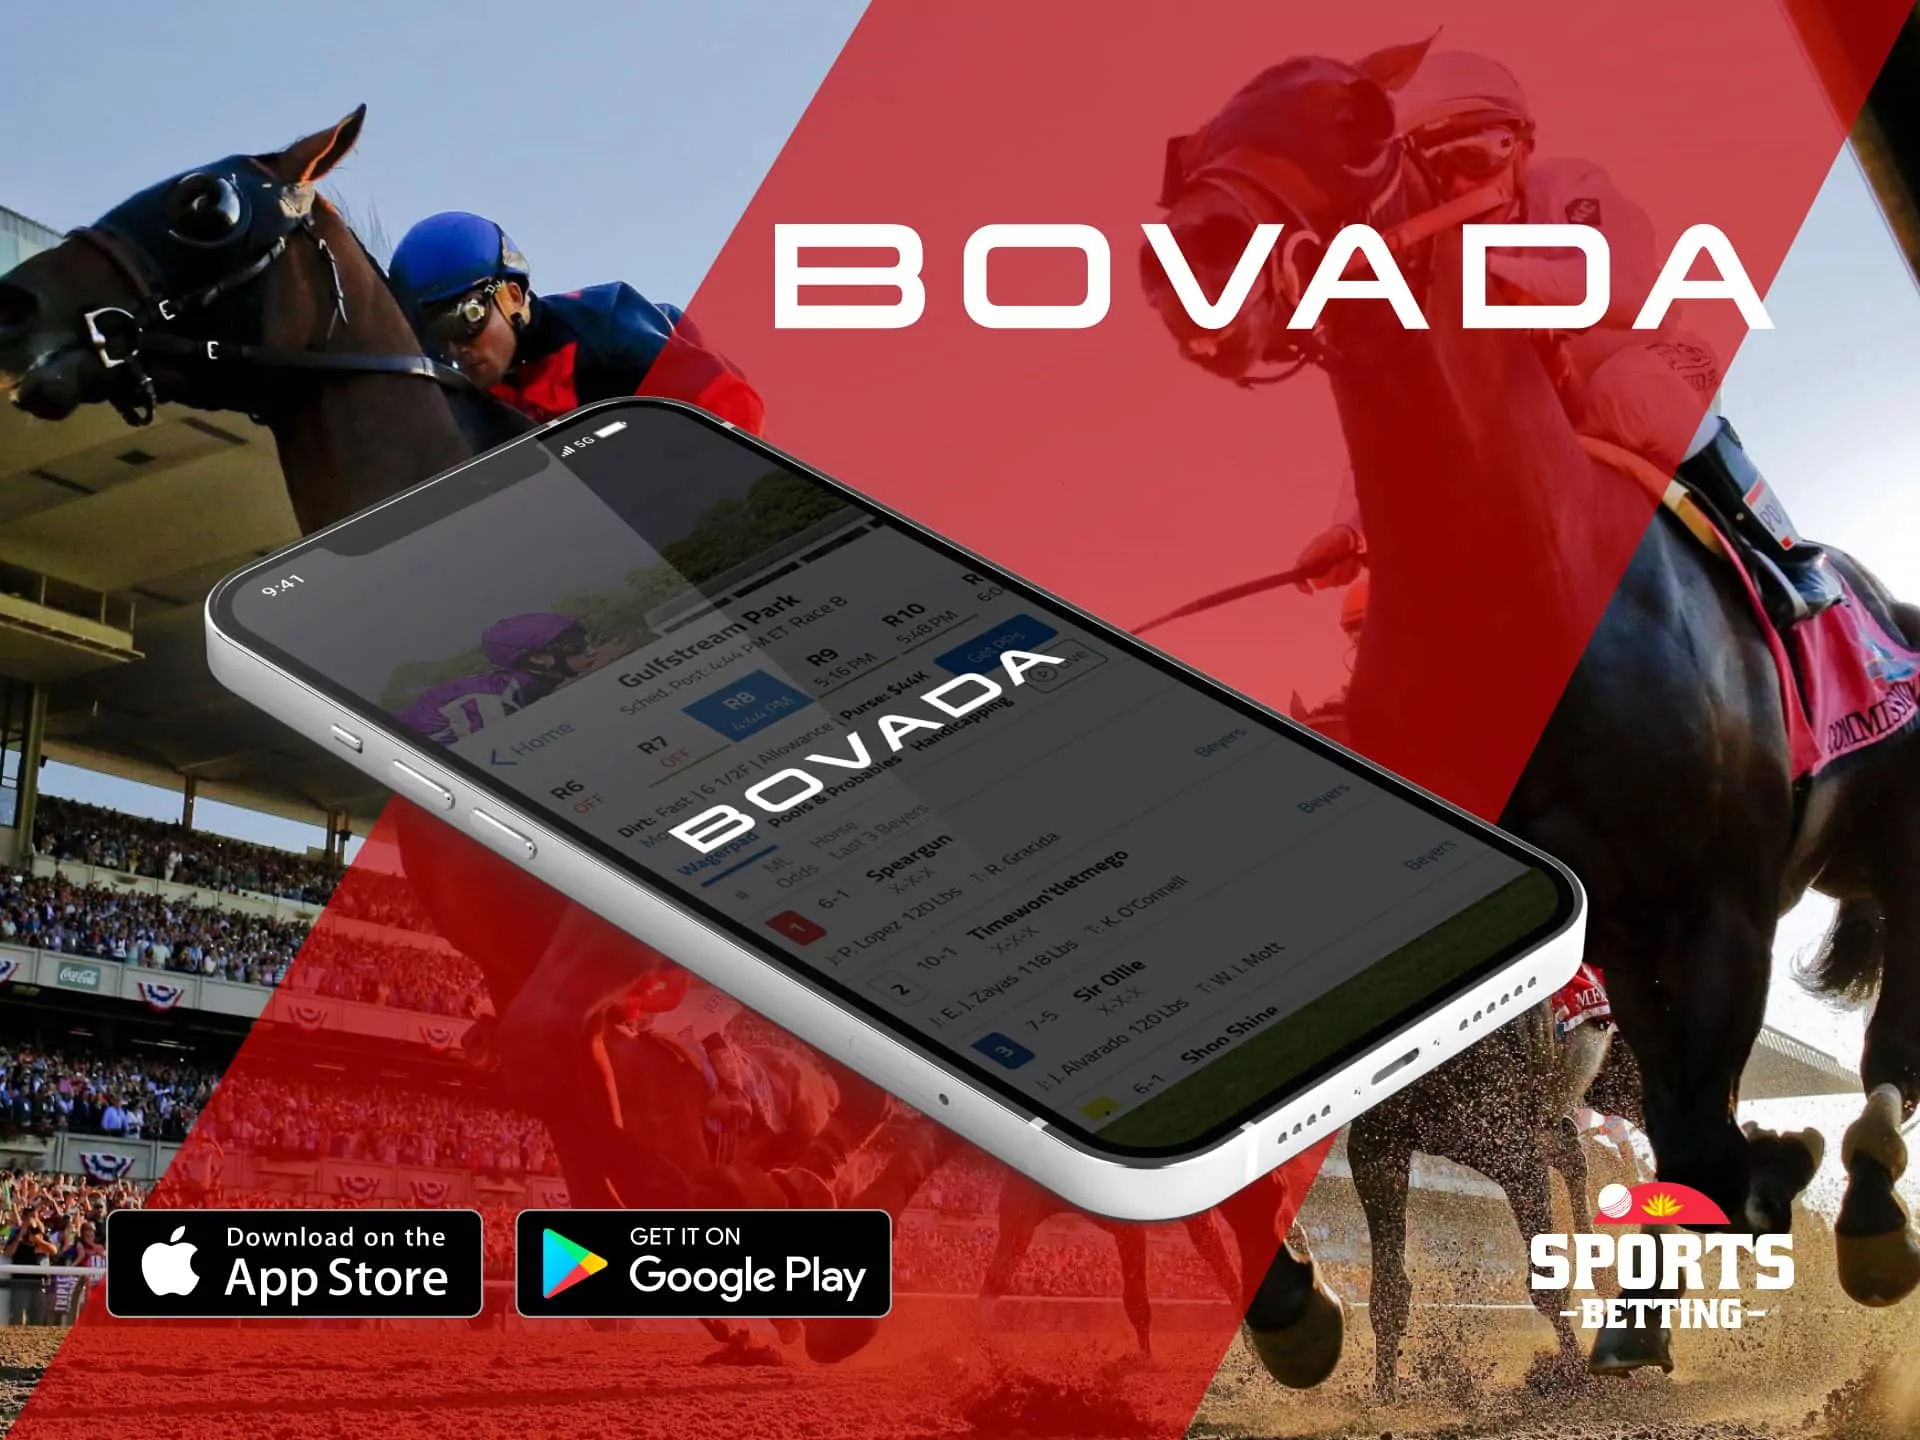 Bovada horse racing betting site with great welcome bonus.